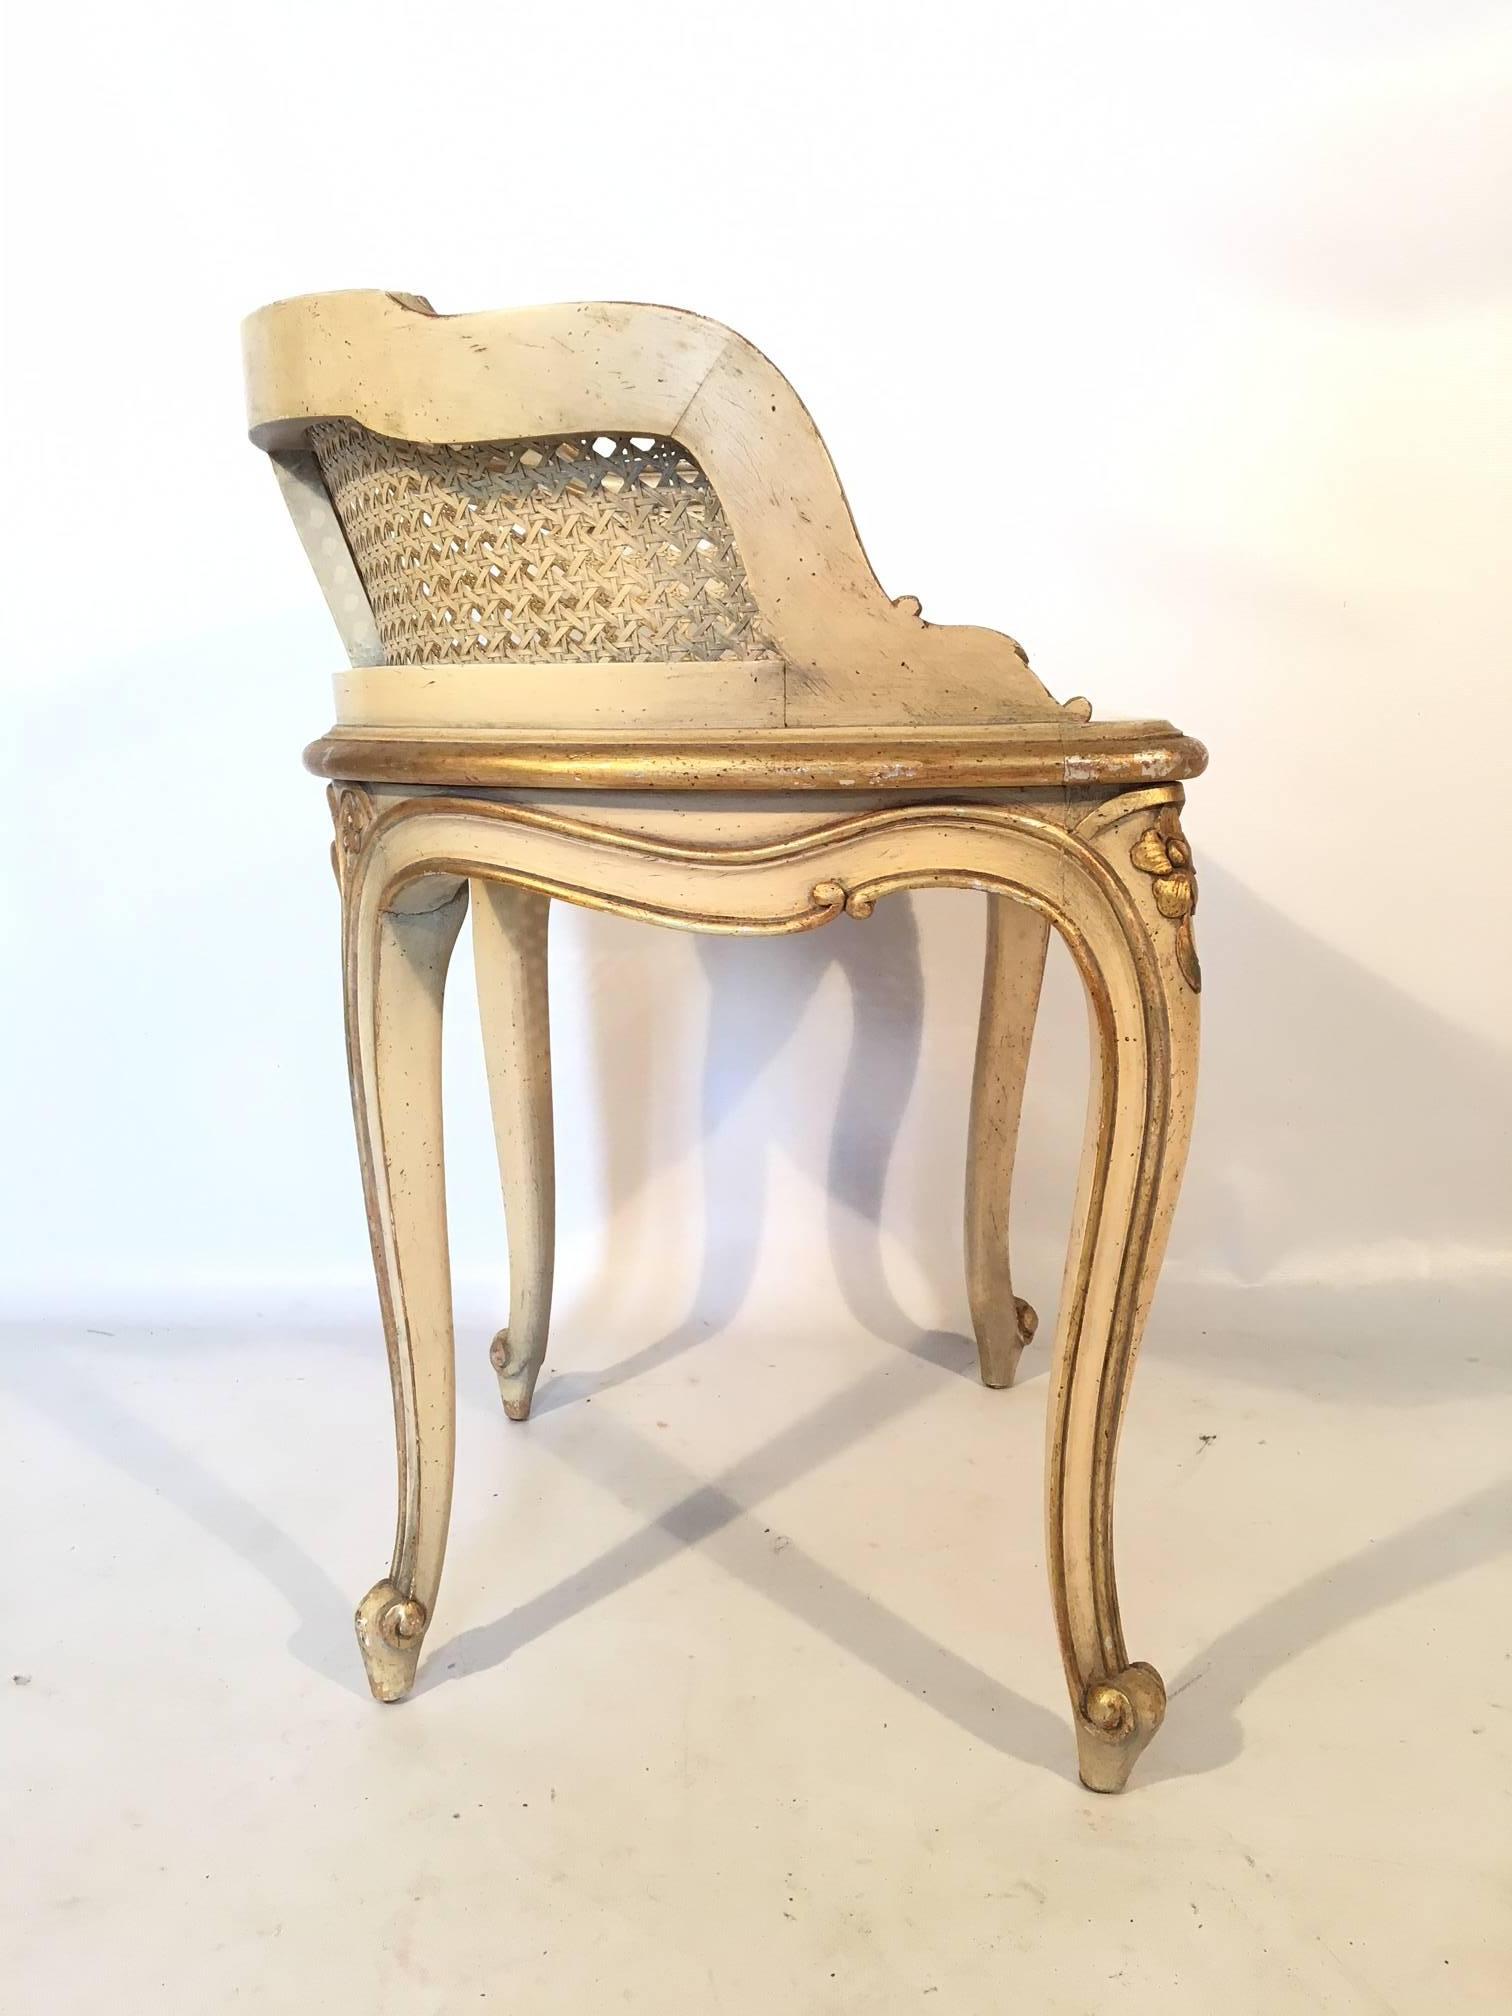 French Provincial style cane seat vanity stool perfect for your Hollywood Regency décor, circa 1960s. Excellent vintage condition.